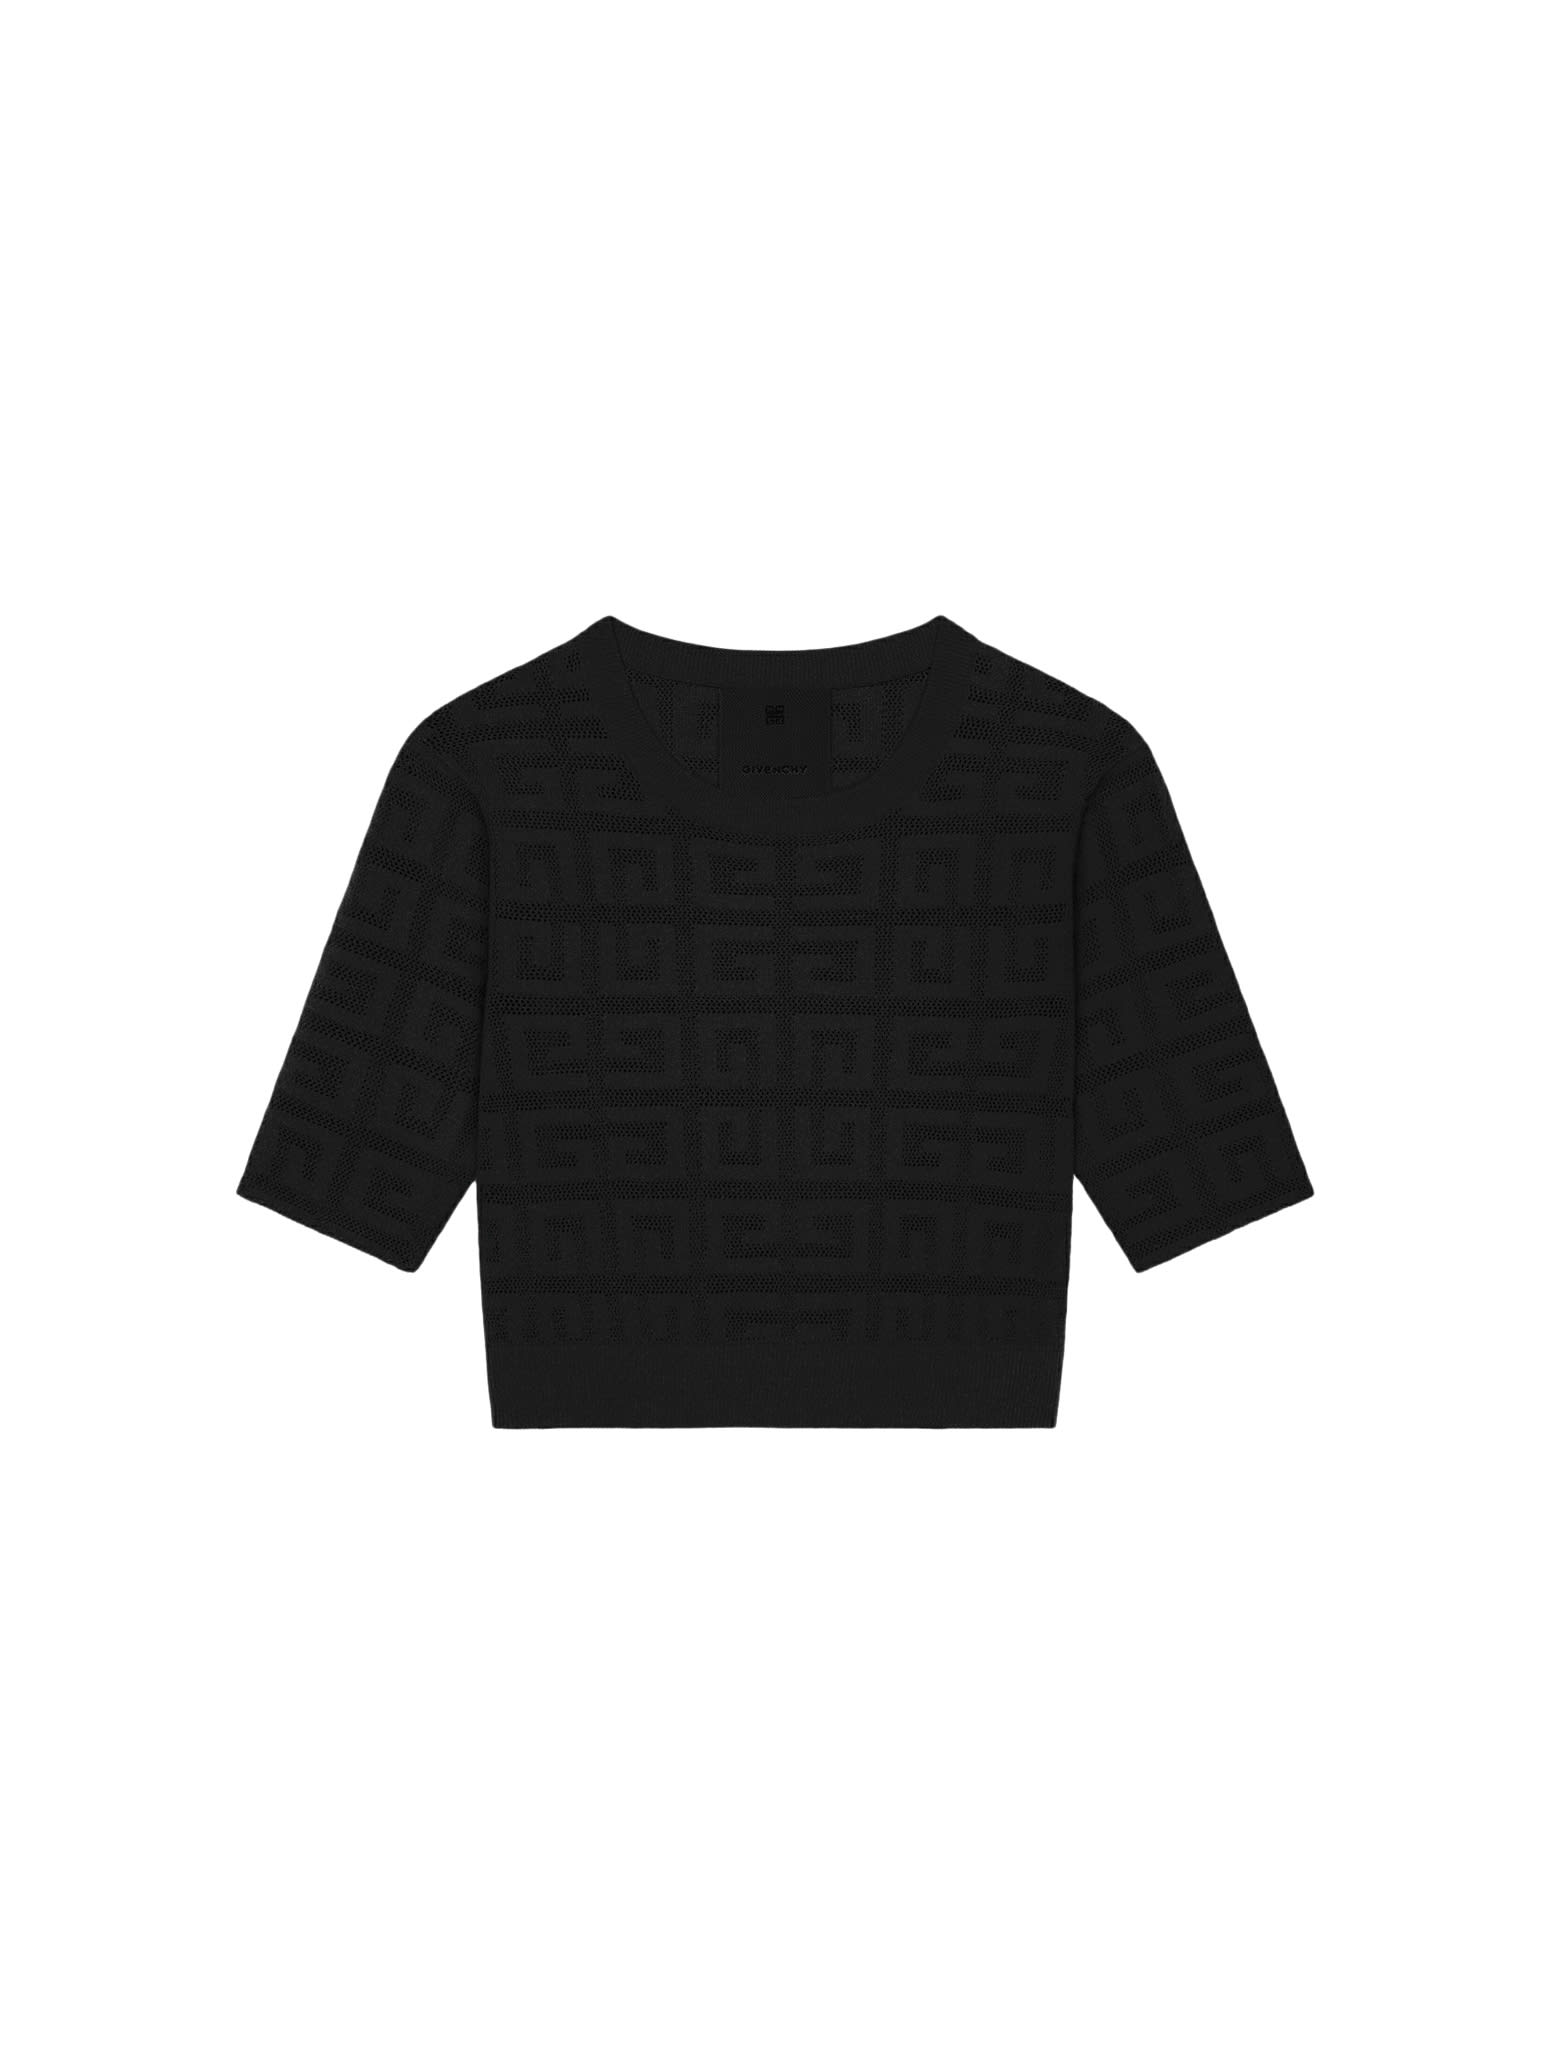 GIVENCHY CROPPED 3/4 SLEEVES SWEATER